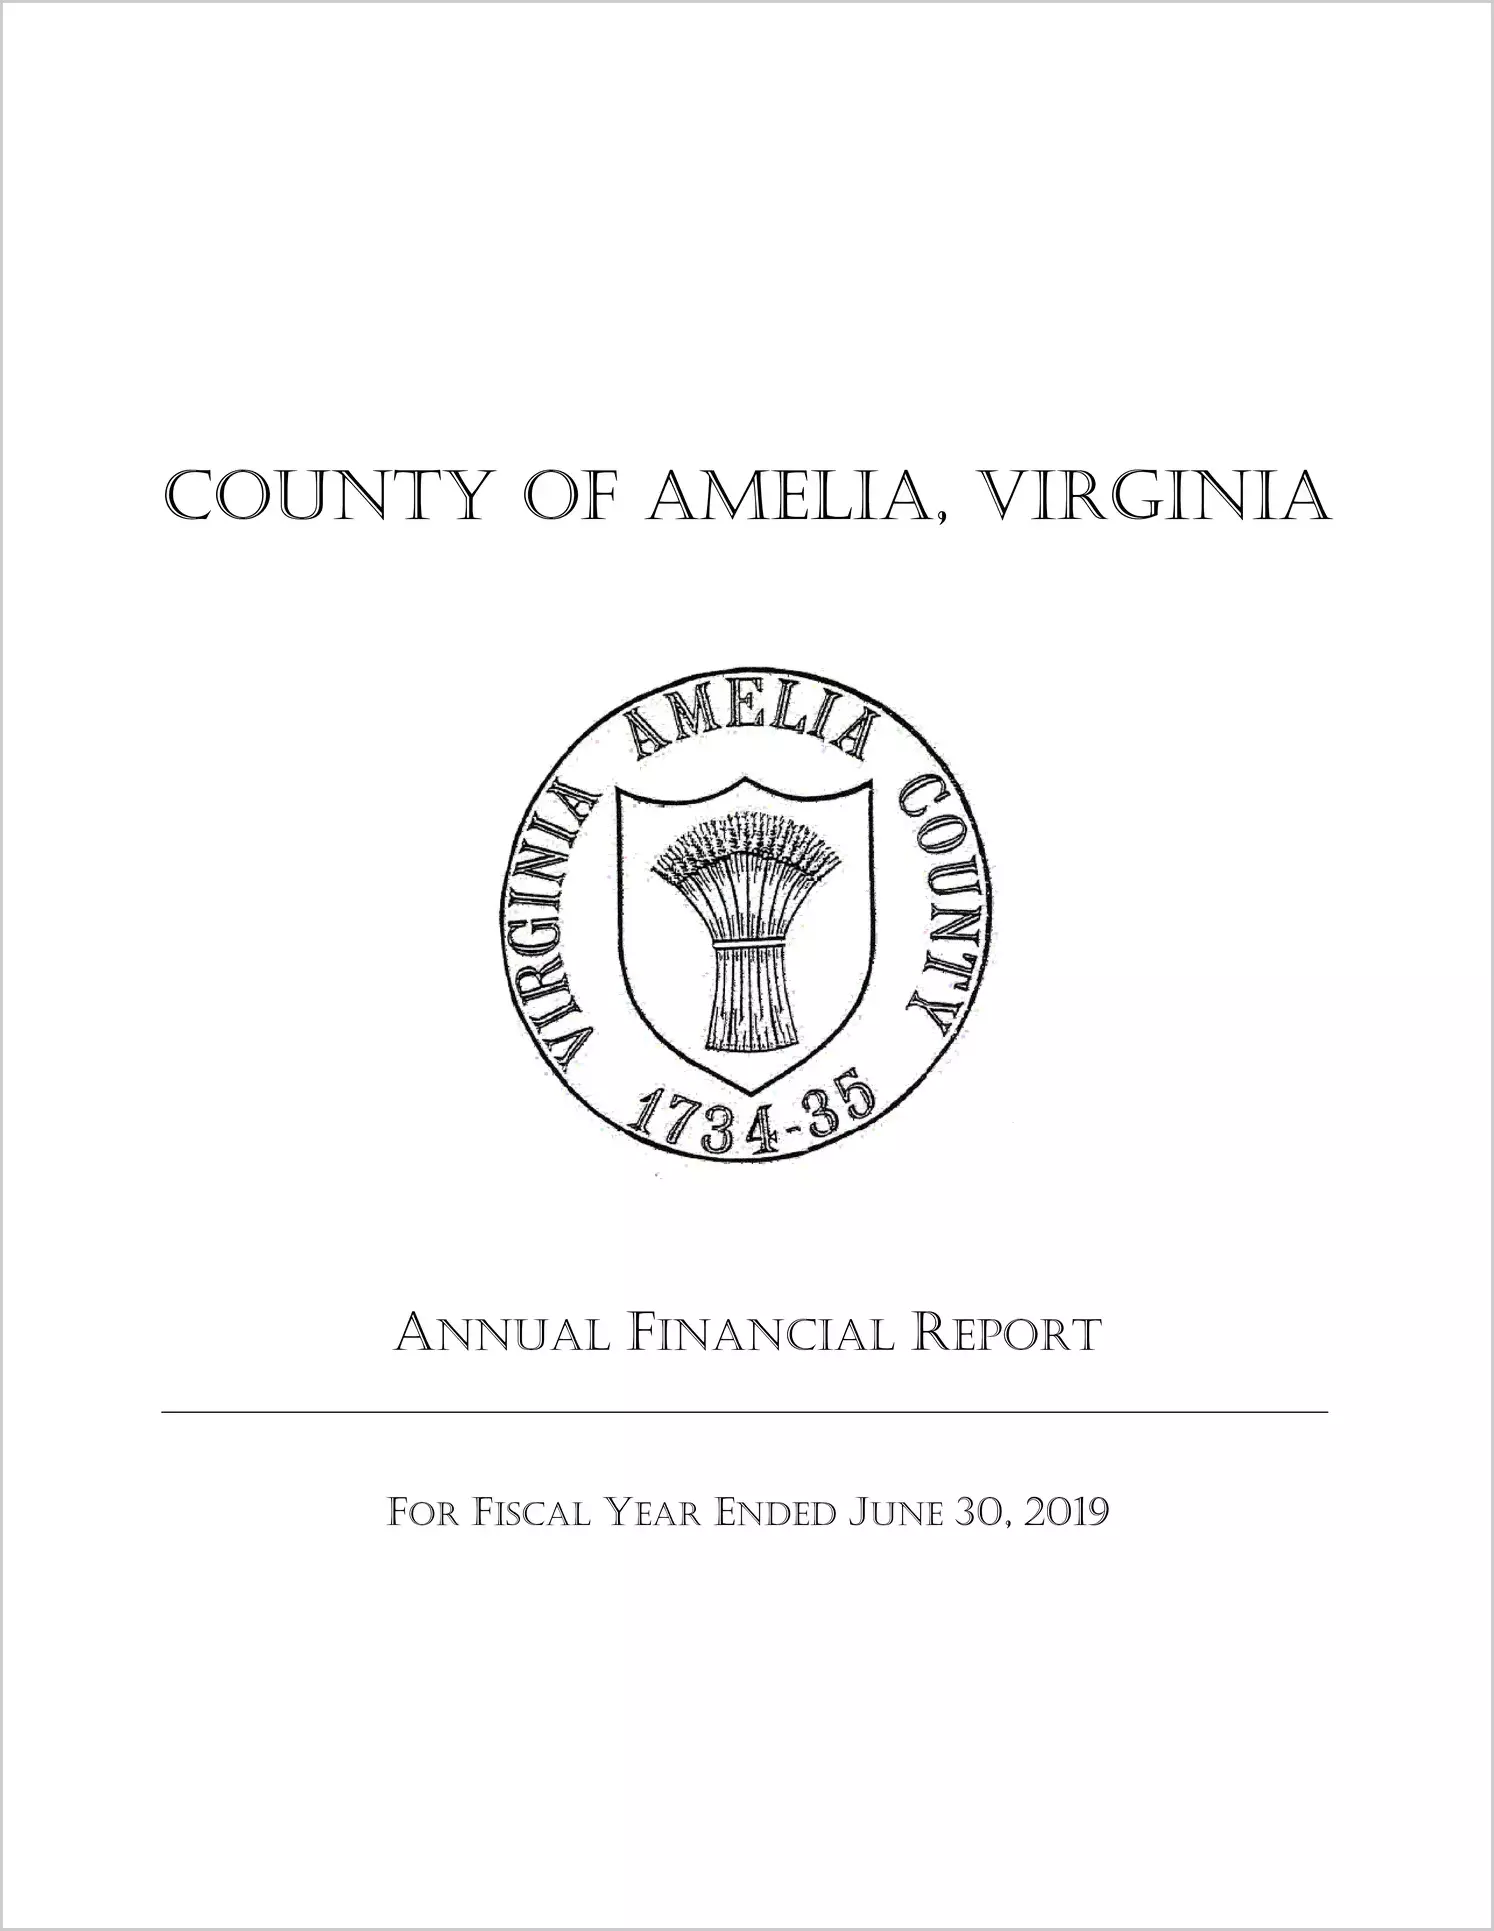 2019 Annual Financial Report for County of Amelia